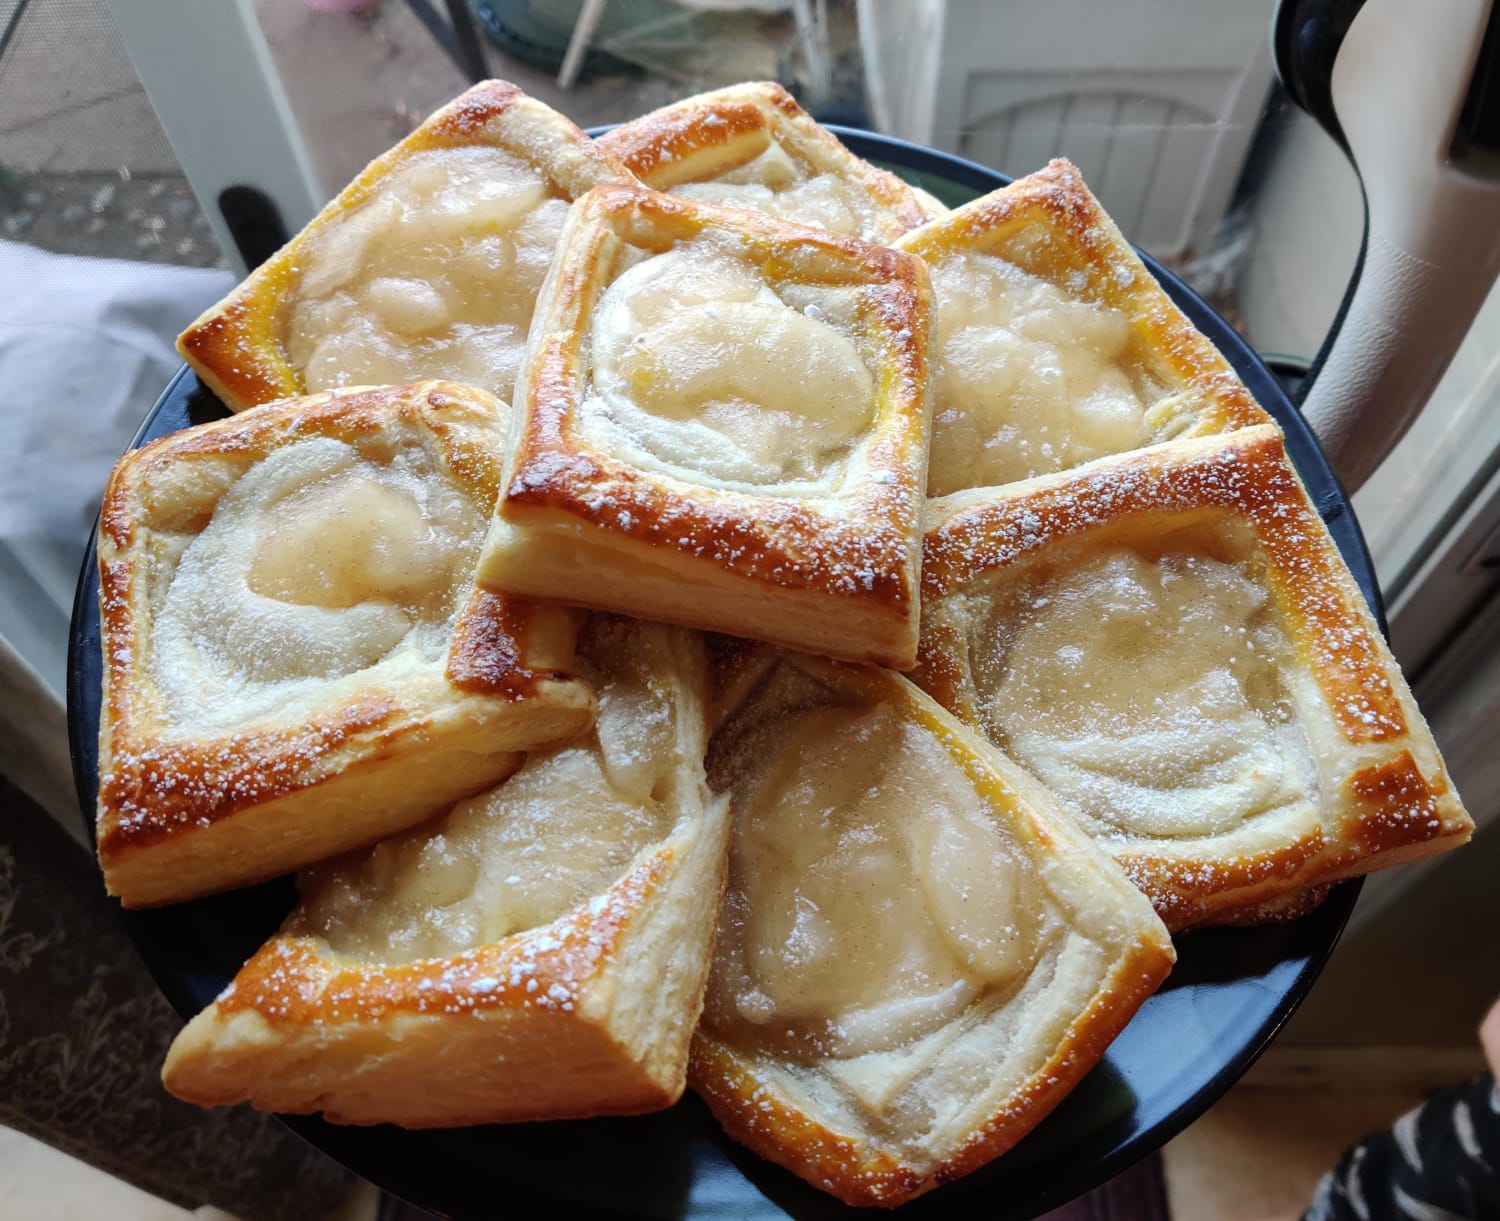 I made apple cream cheese danishes so my husband wouldn't spend money on donuts this morning